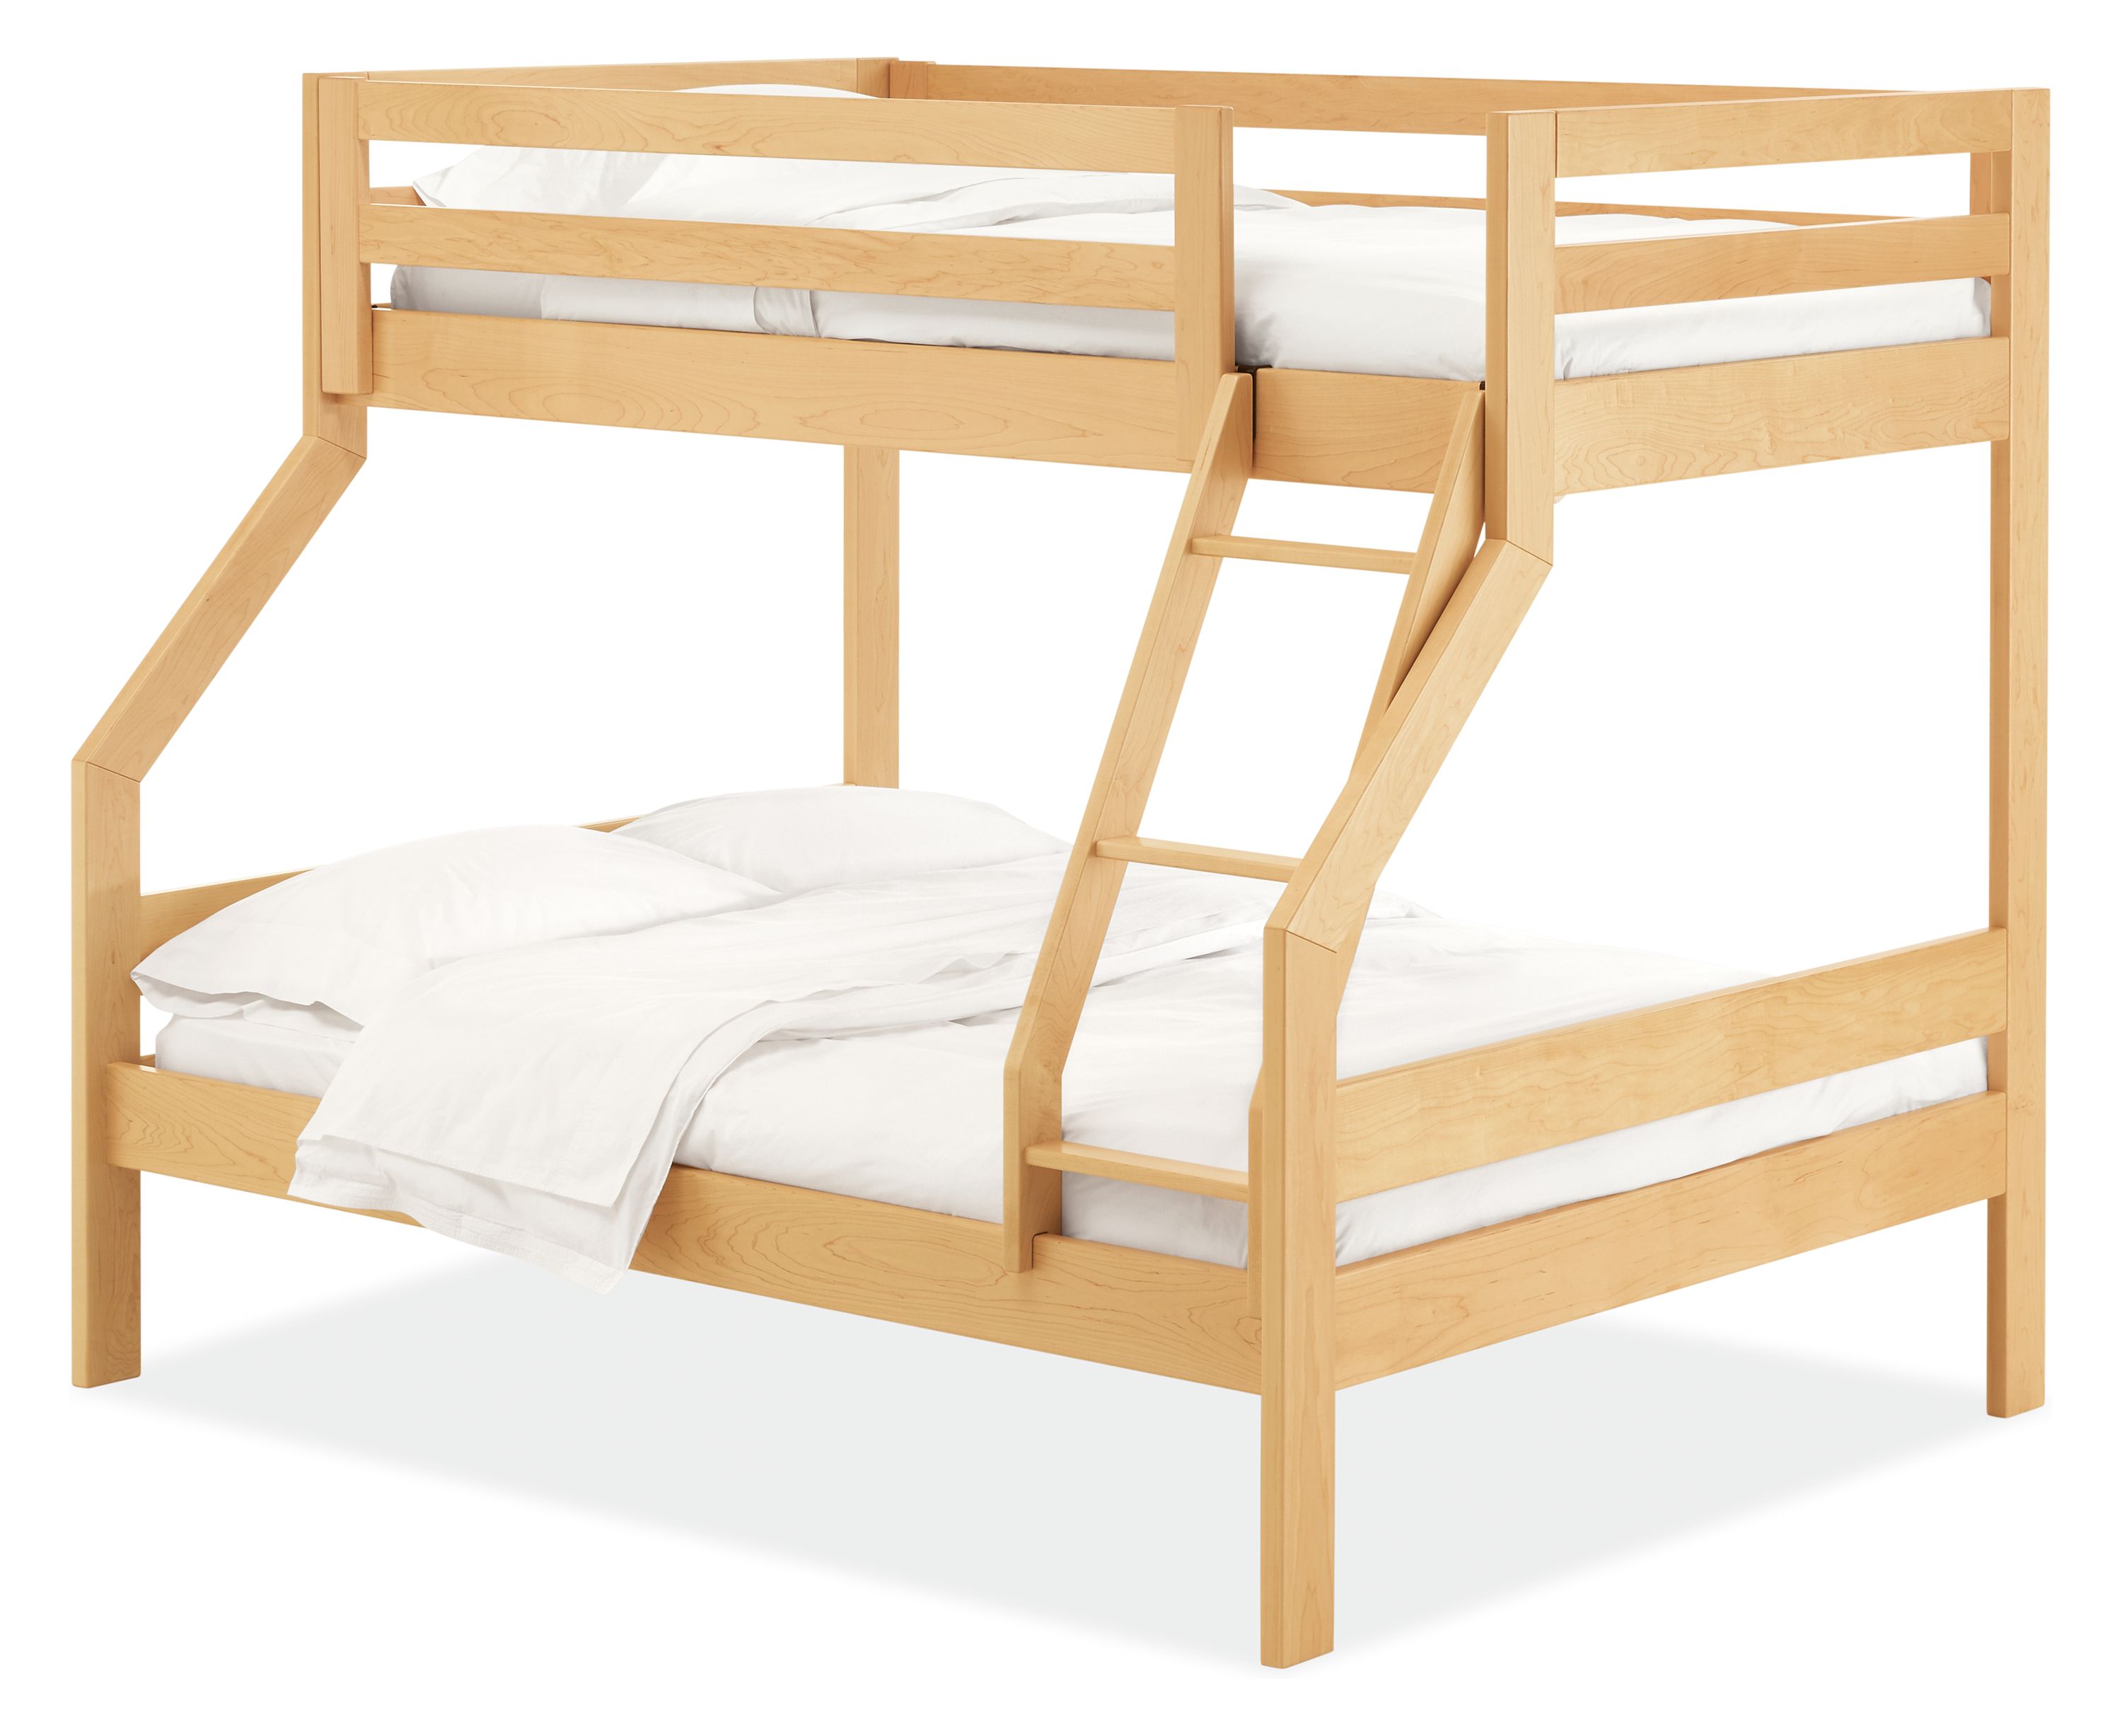 Waverly Bunk Bed Twin Over Full, Bunk Bed Over Full